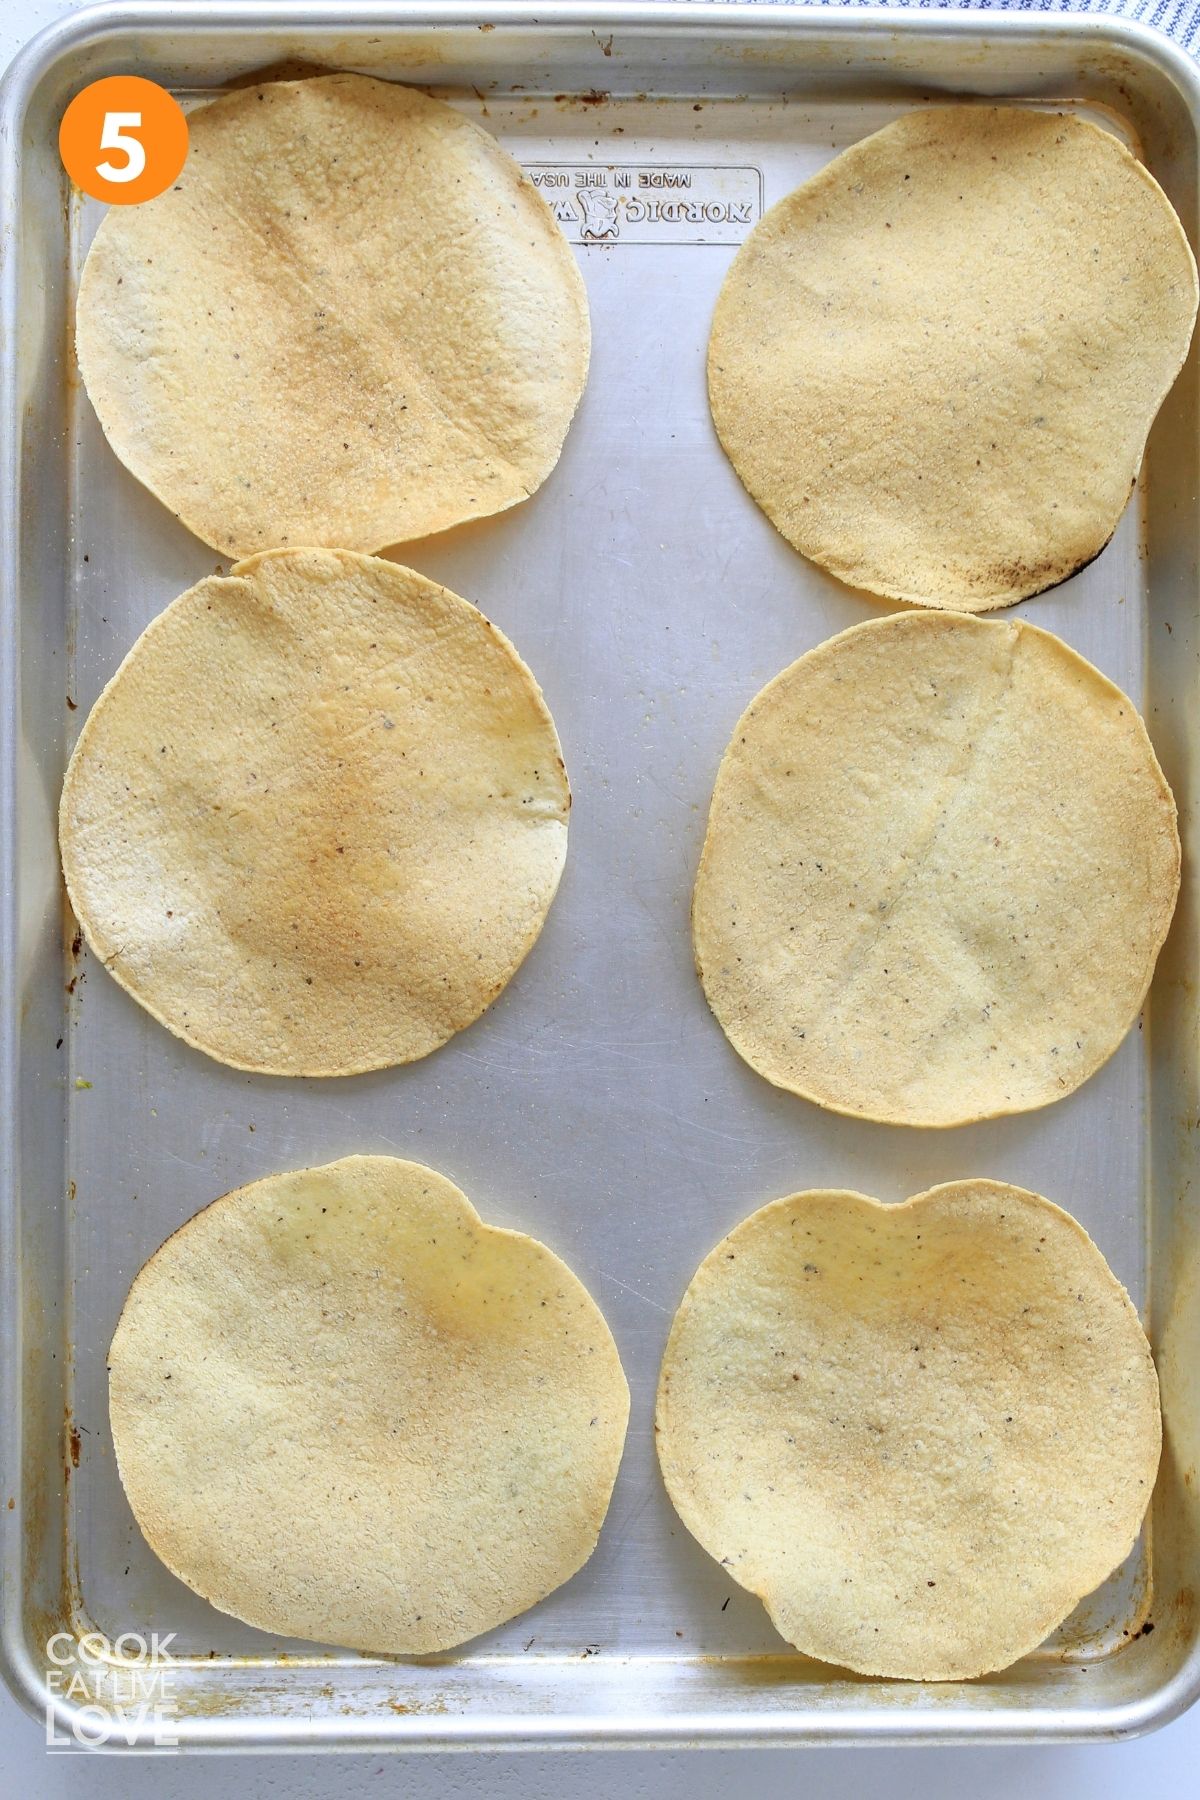 Baked tostadas laid out on a baking sheet.